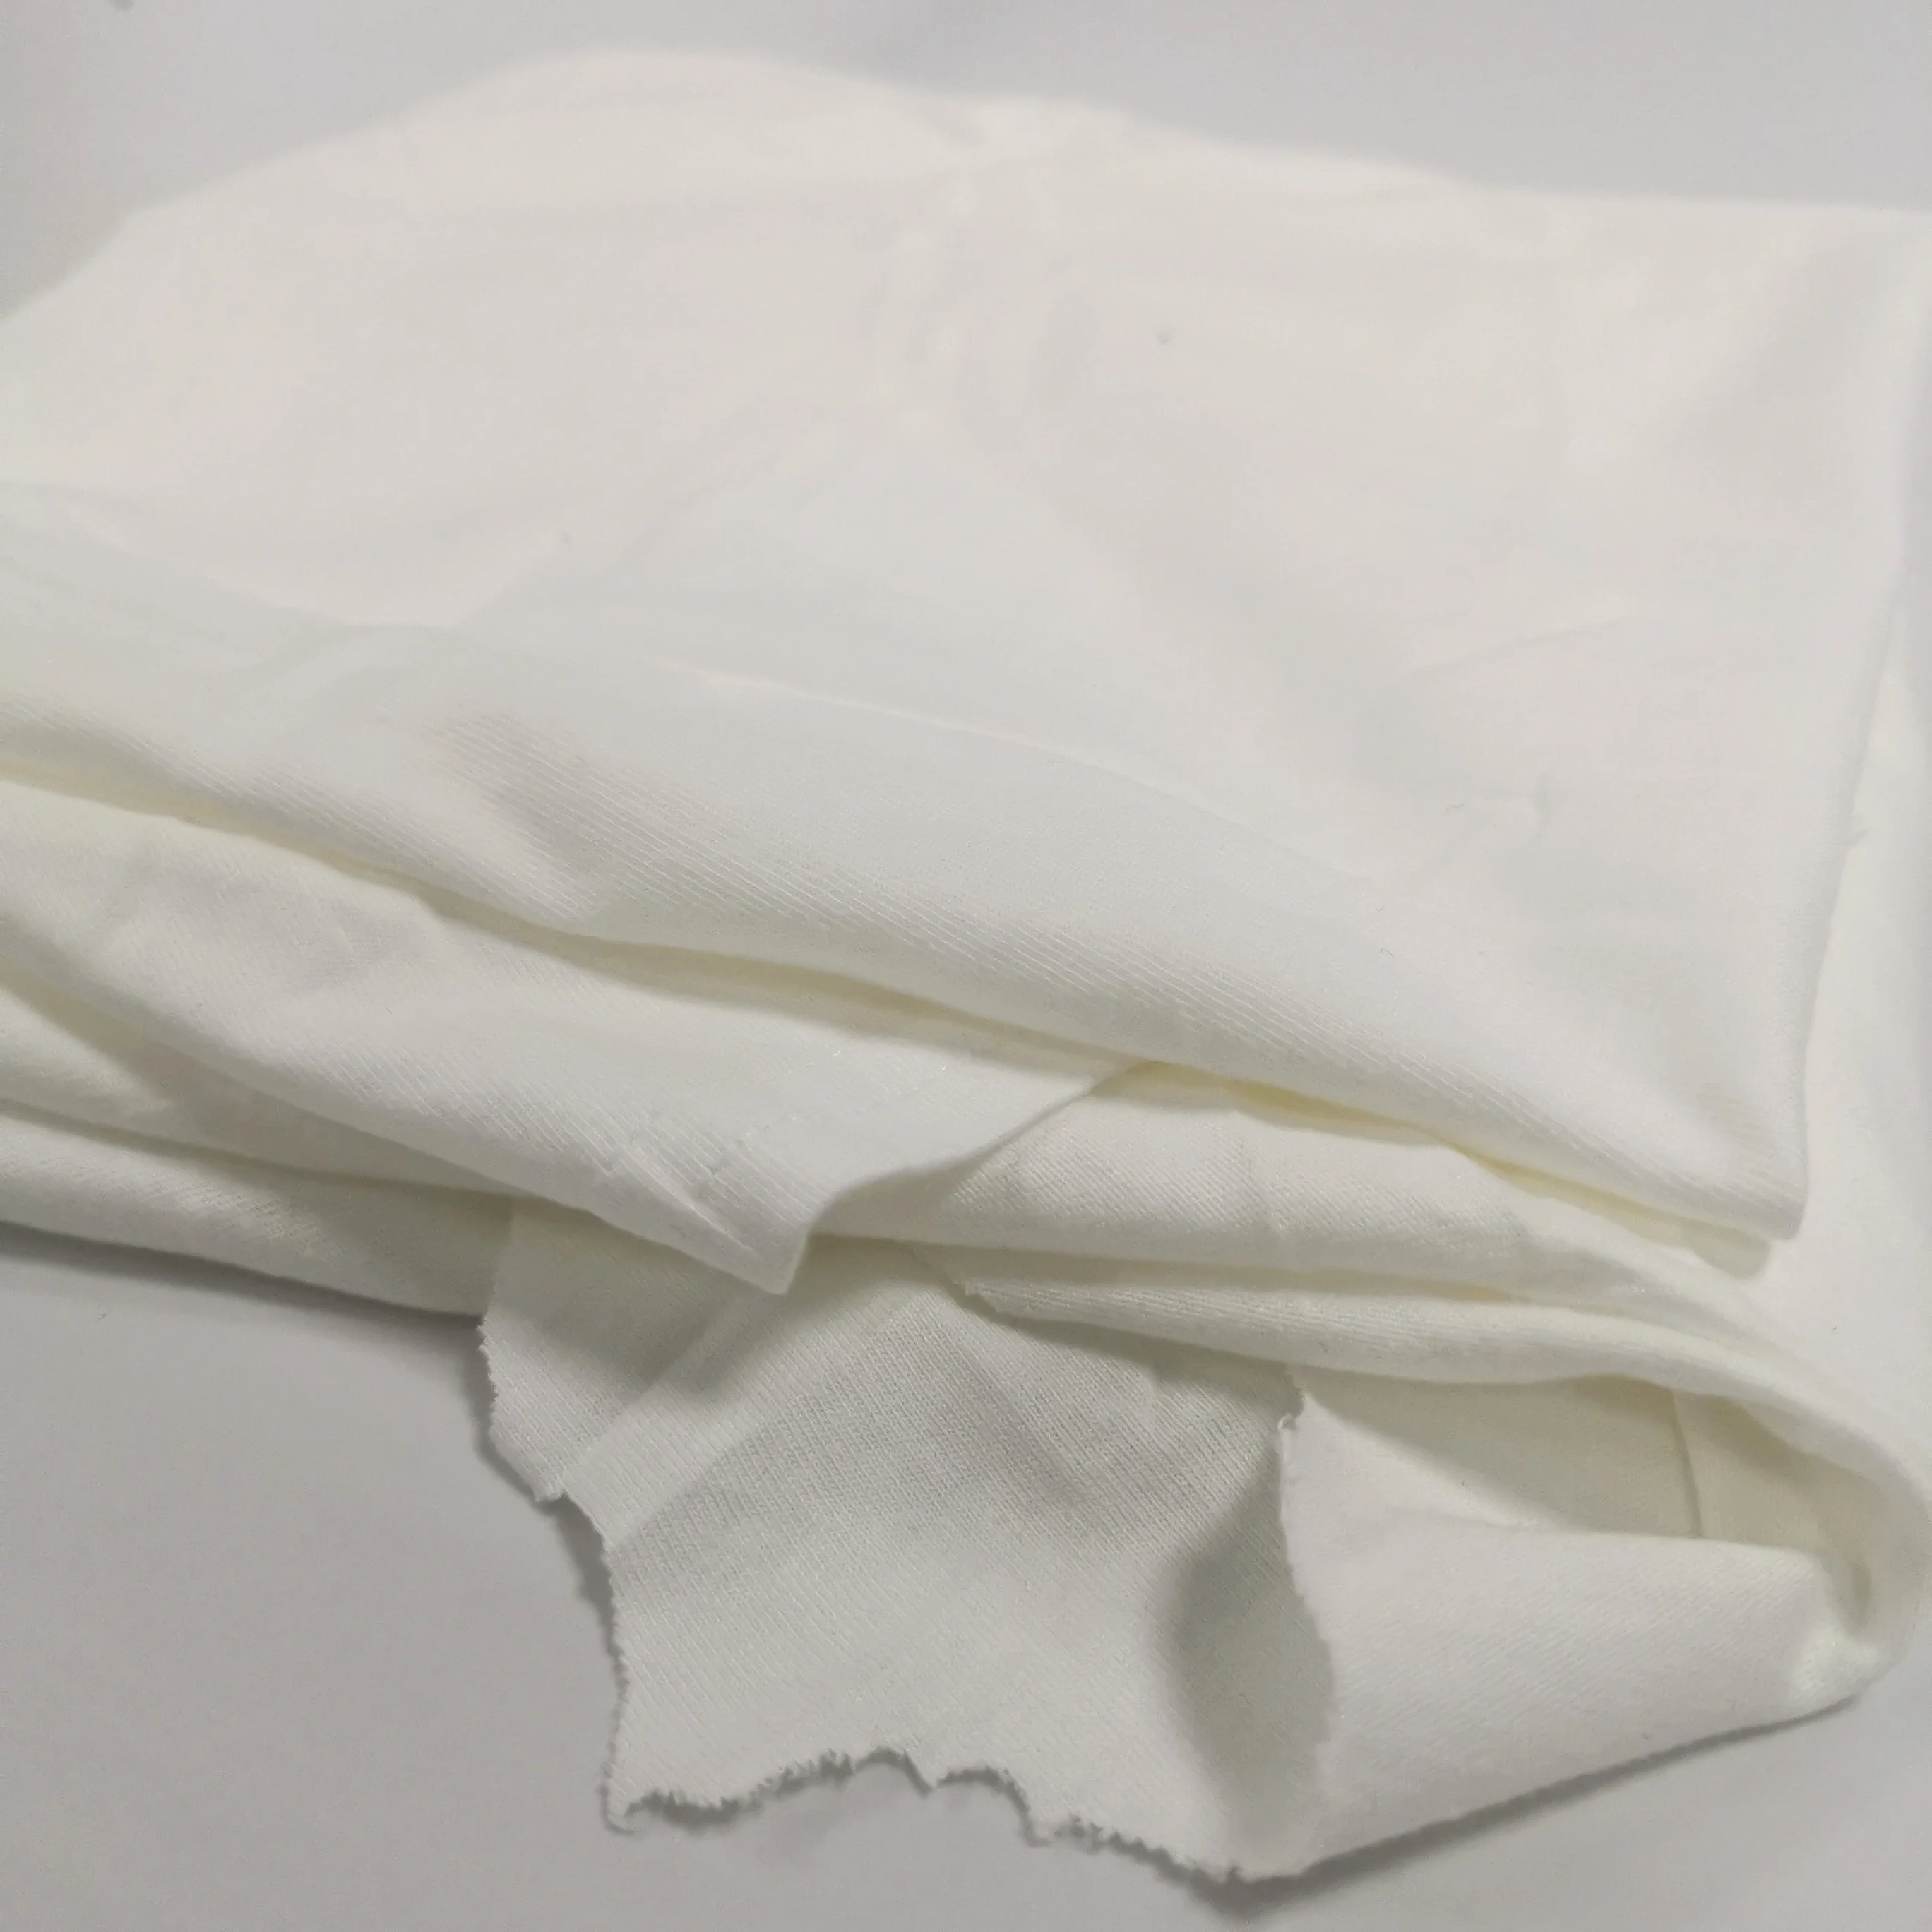 Recycled textile waste 10 kg 25 kg Bale of rags 95% cotton White T-shirt cotton rags